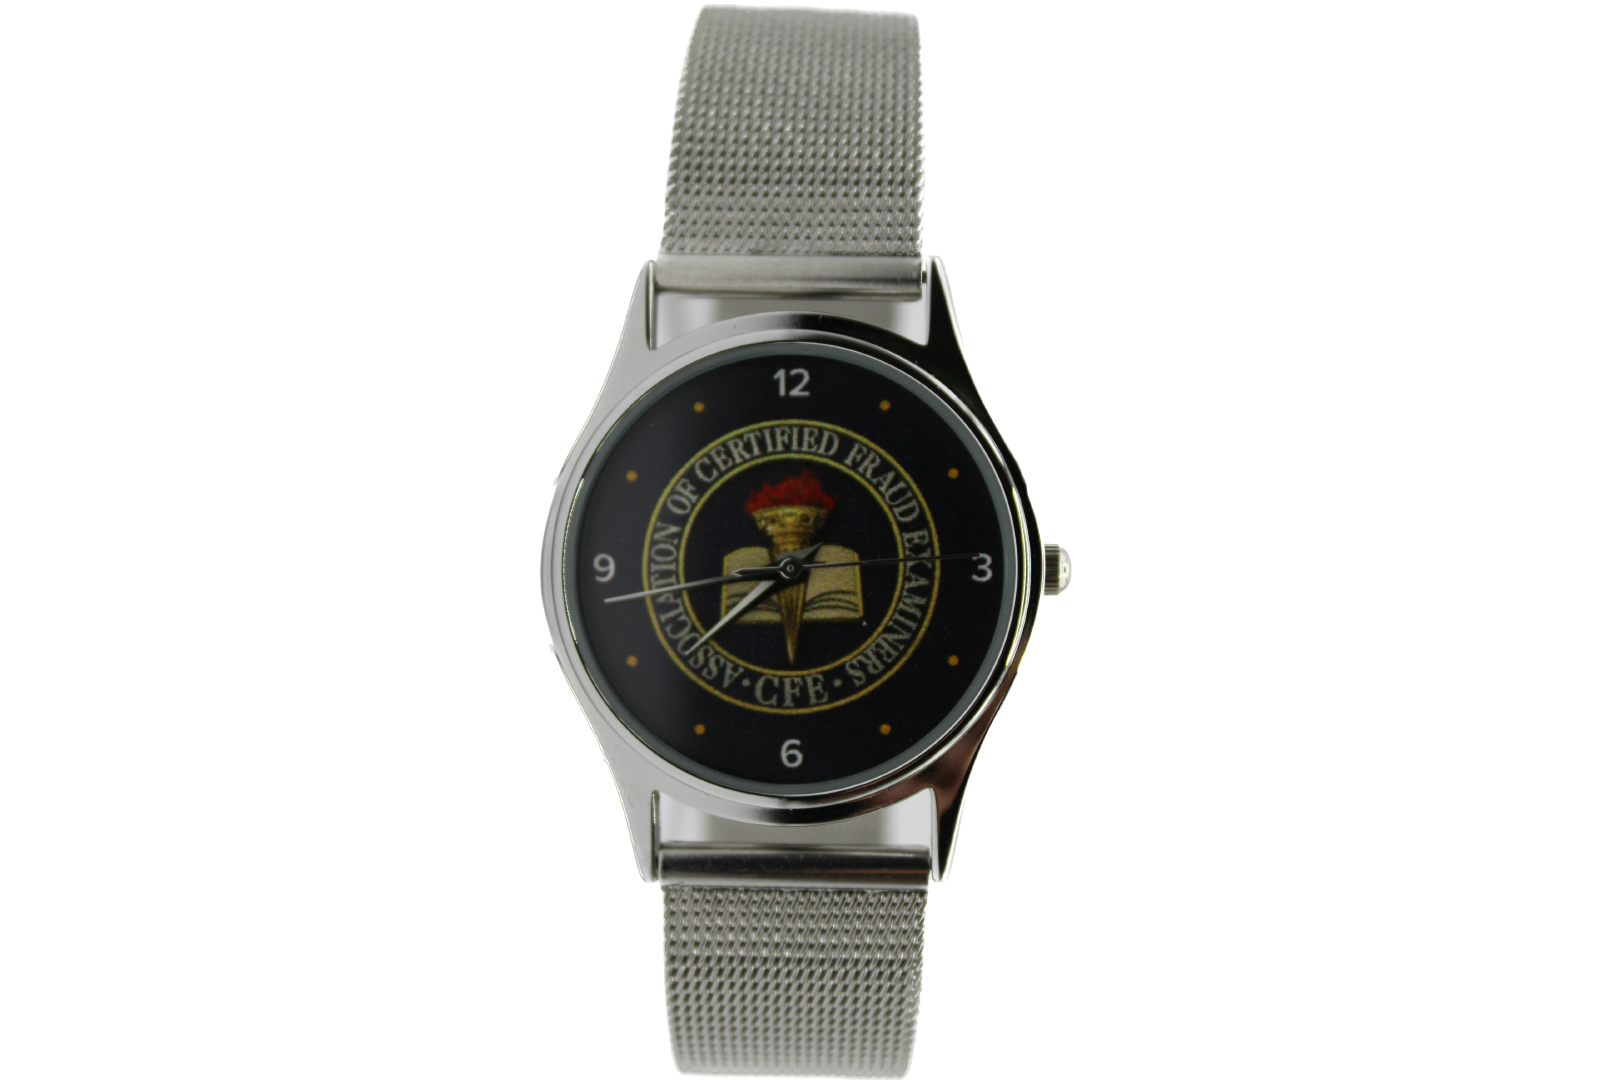 Stainless Steel Unisex Watch with ACFE Seal on Watch Face